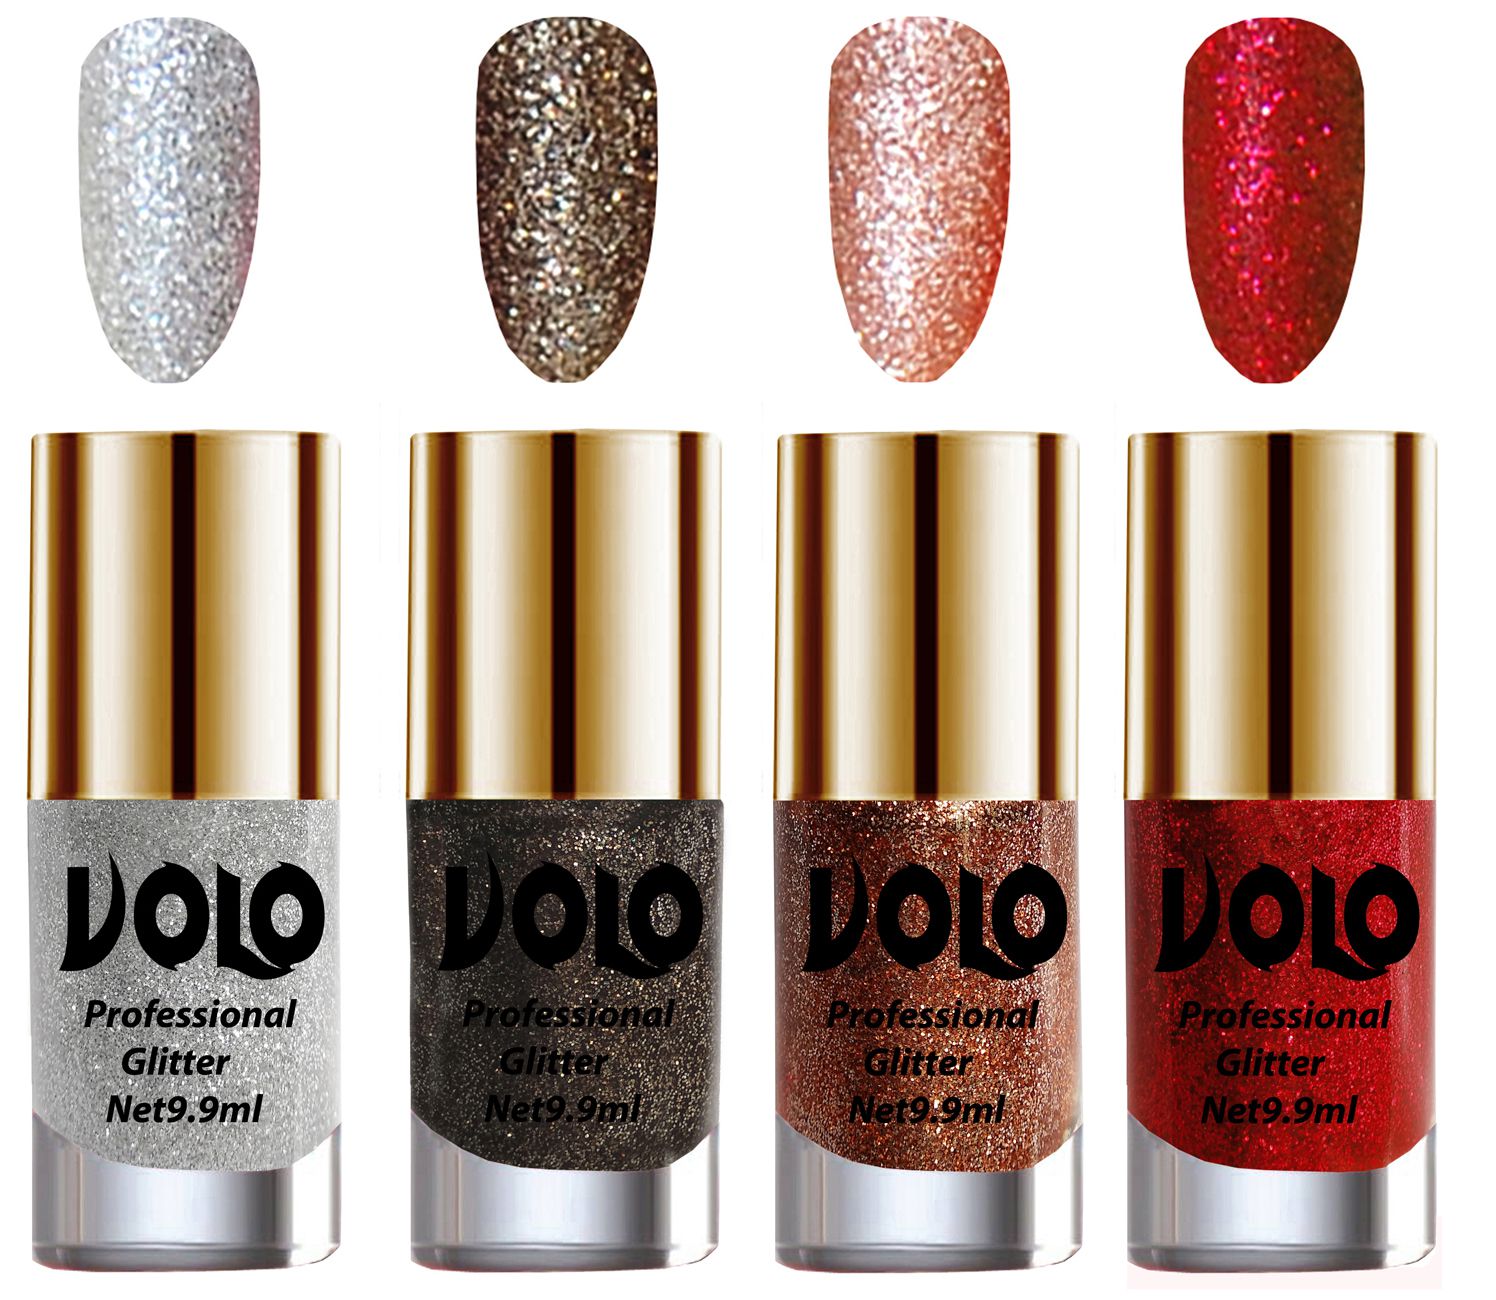     			VOLO Professionally Used Glitter Shine Nail Polish Silver,Grey,Peach Red Pack of 4 39 mL